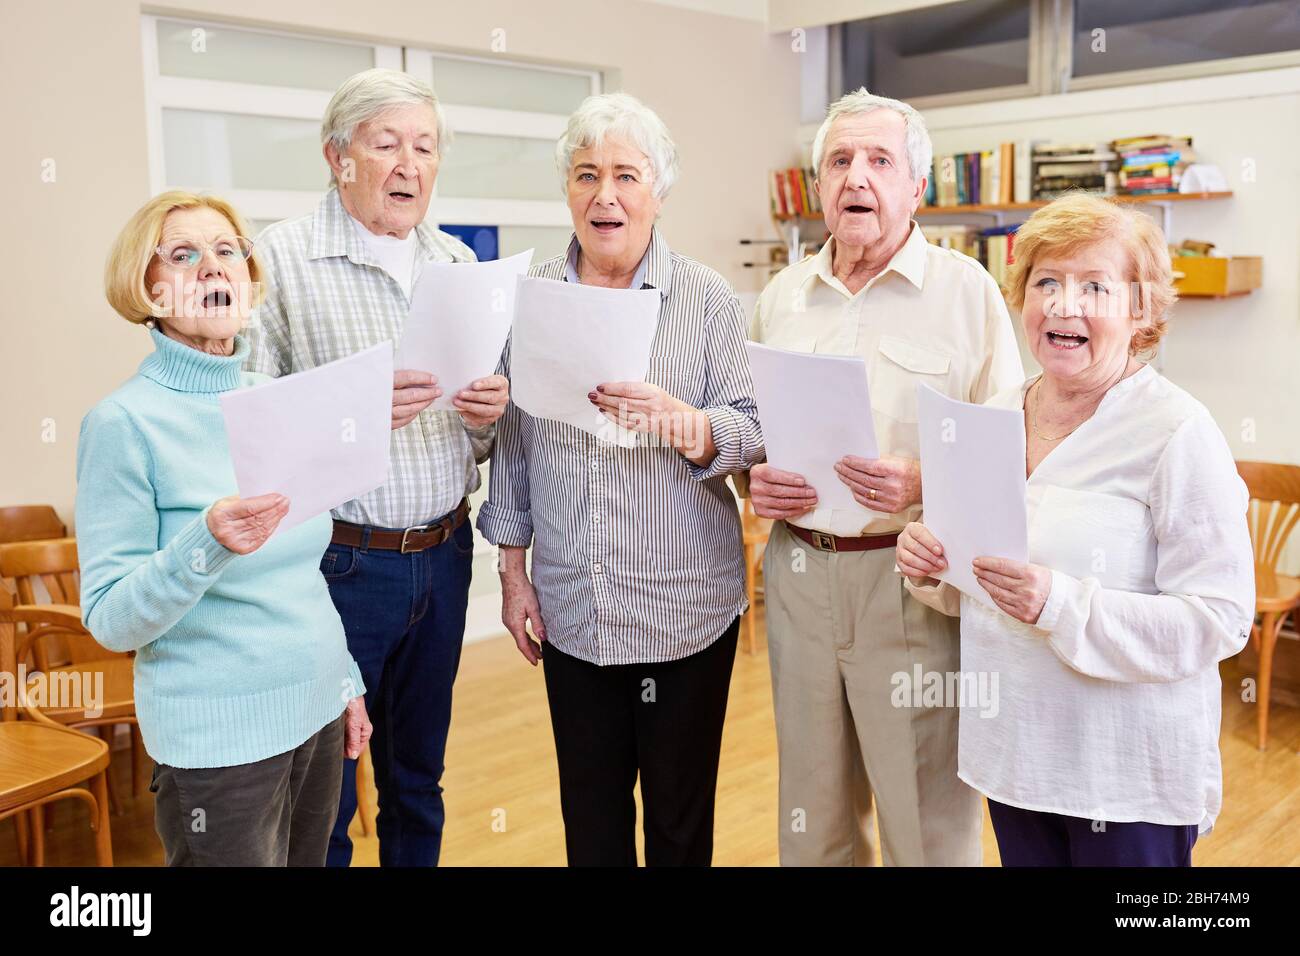 Seniors from the senior choir sing together at the choir rehearsal in the retirement home Stock Photo